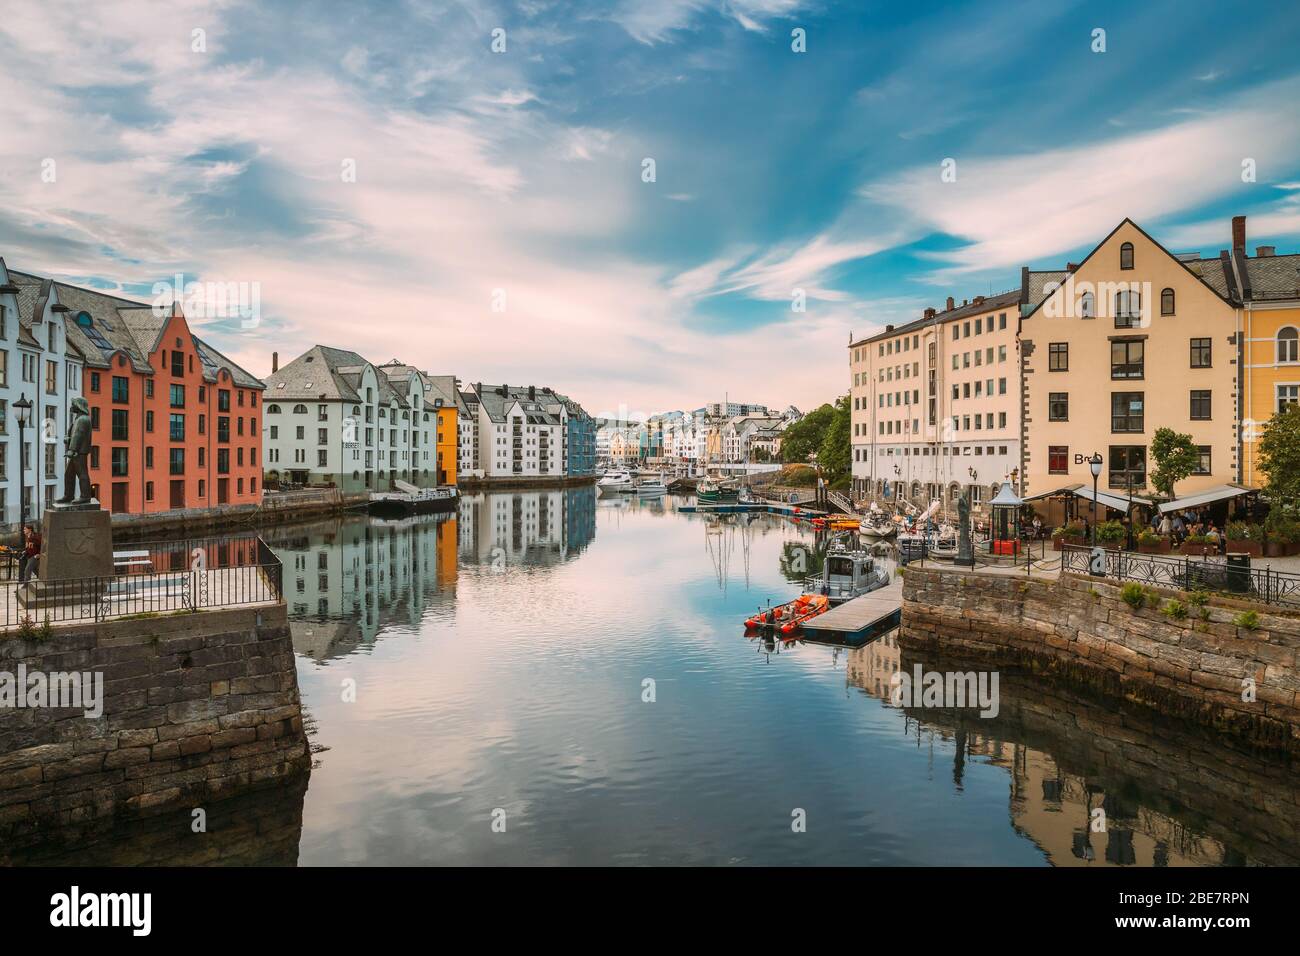 Alesund, Norway - June 19, 2019: Old Wooden Houses In Cloudy Summer Day. Art Nouveau Architecture Is Historic Heritage And Landmark. Stock Photo